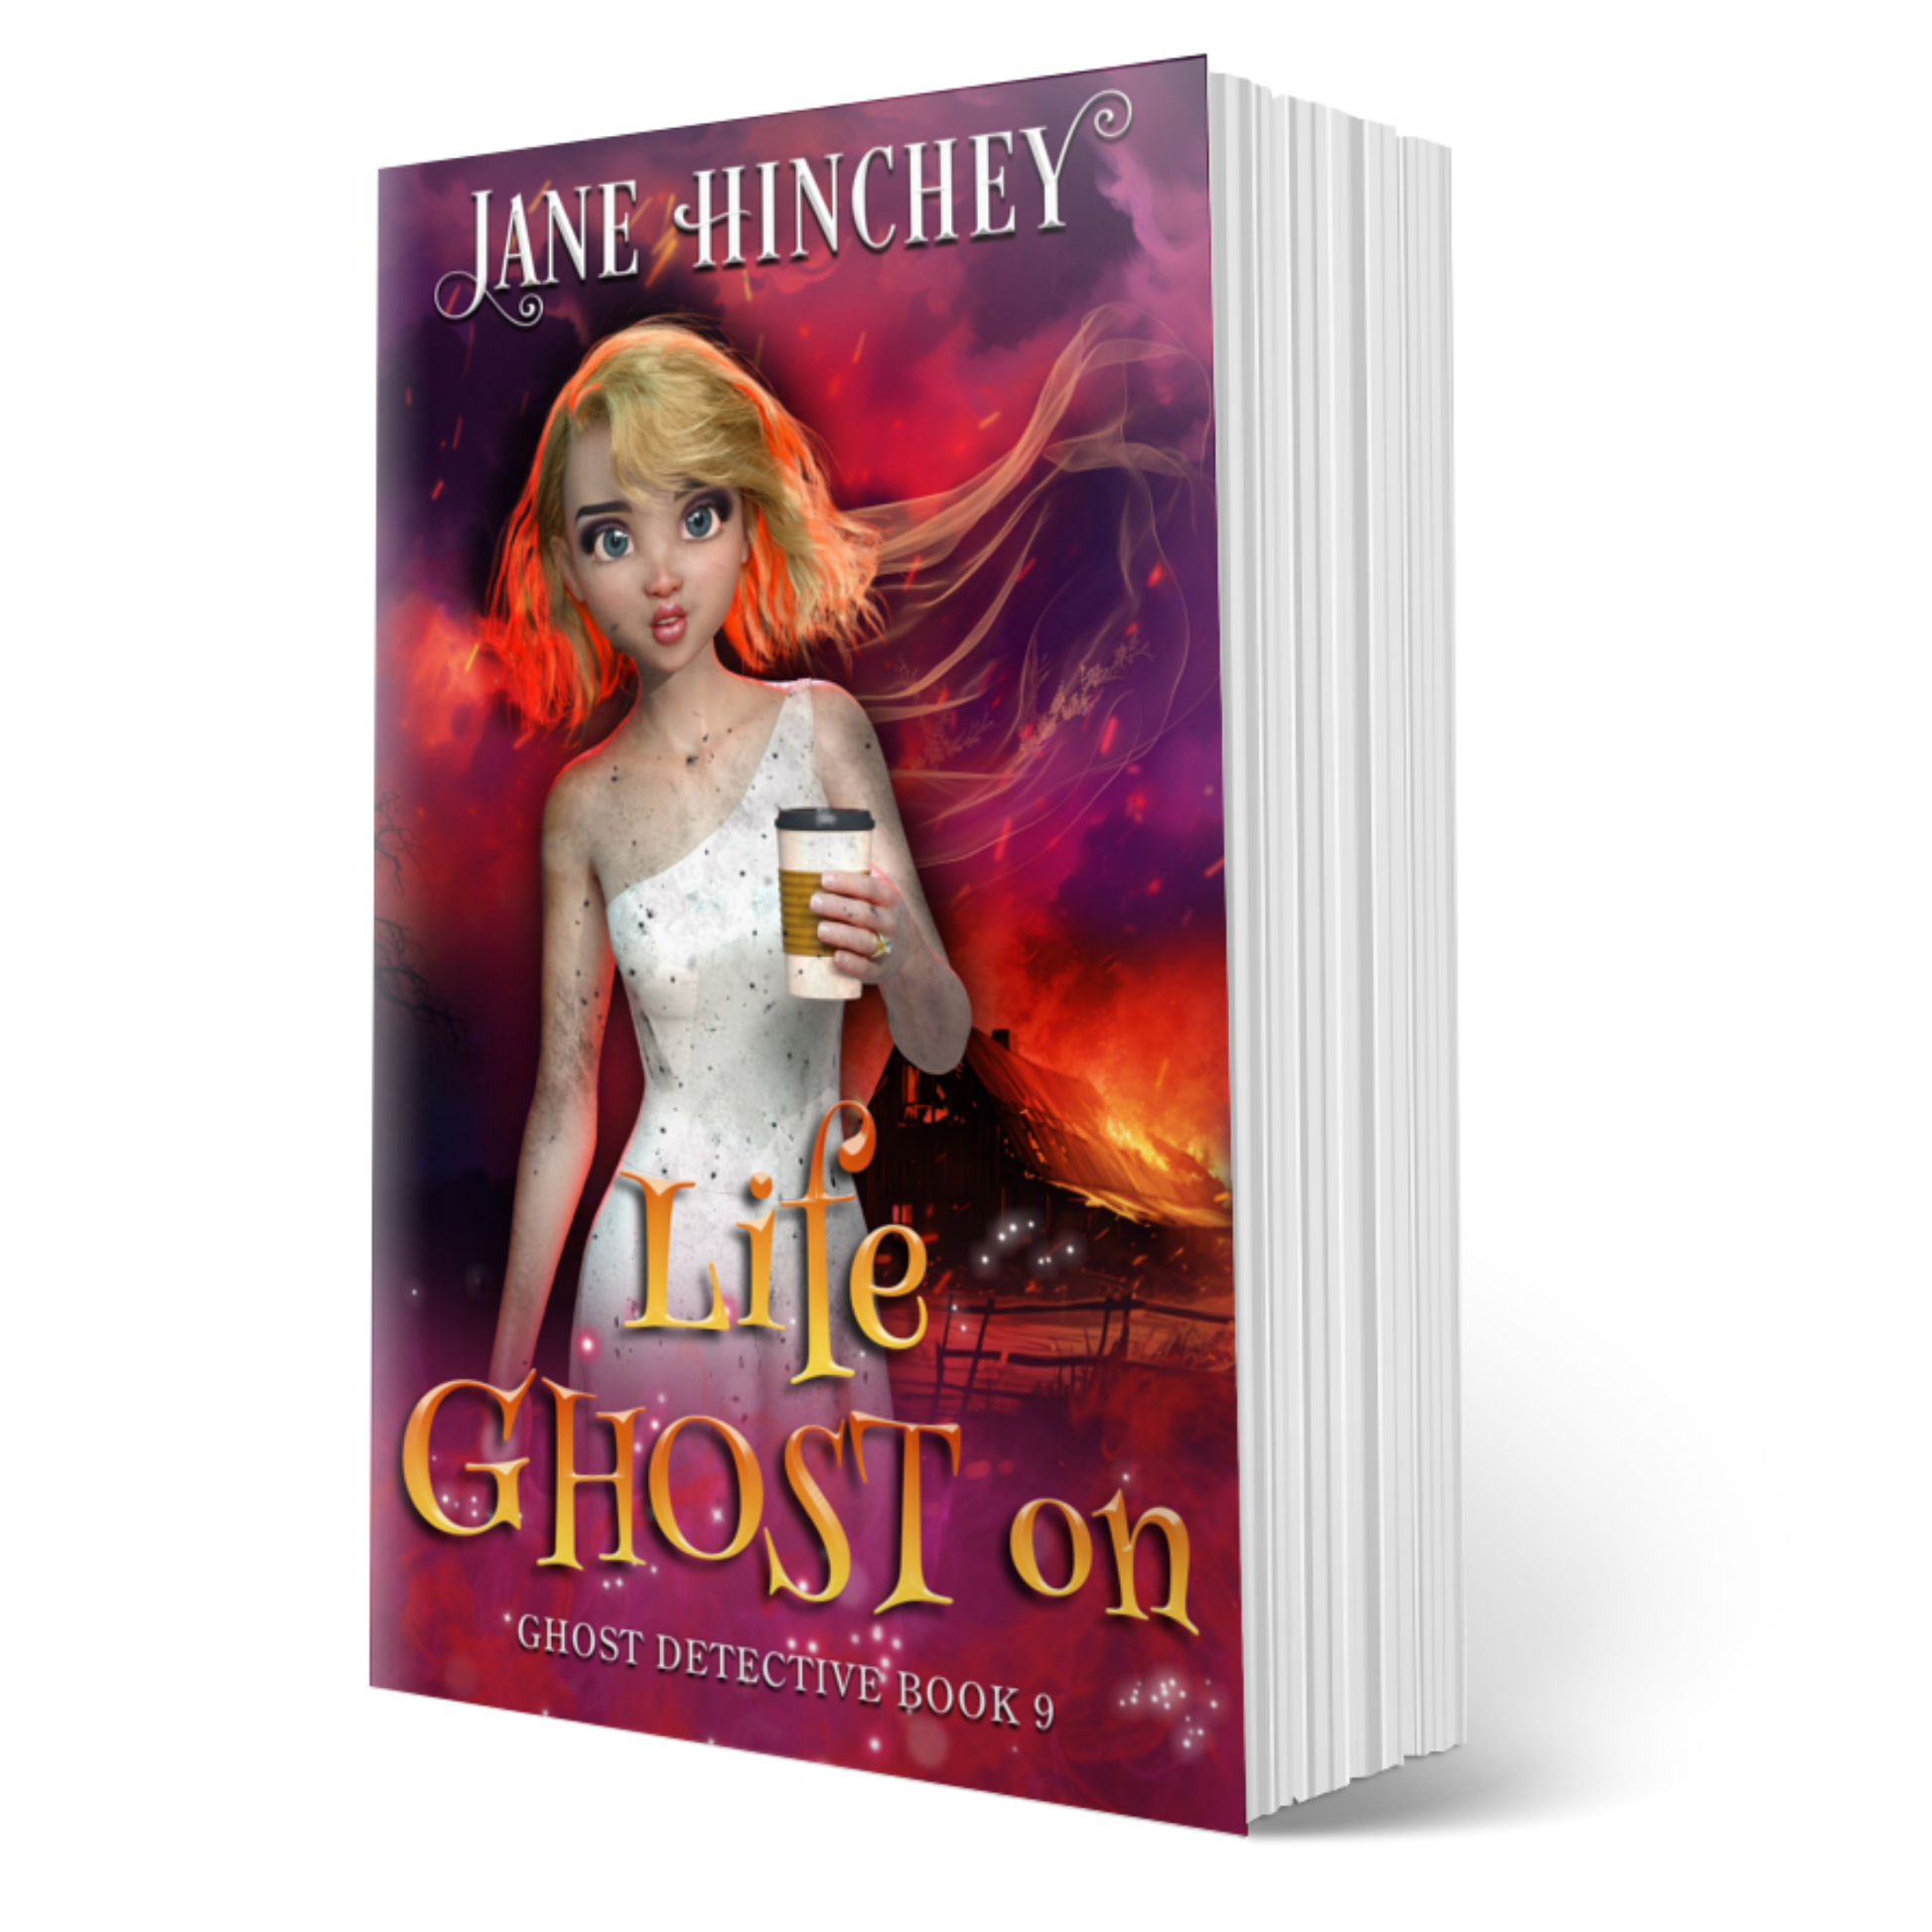 Life Ghost On by Jane Hinchey